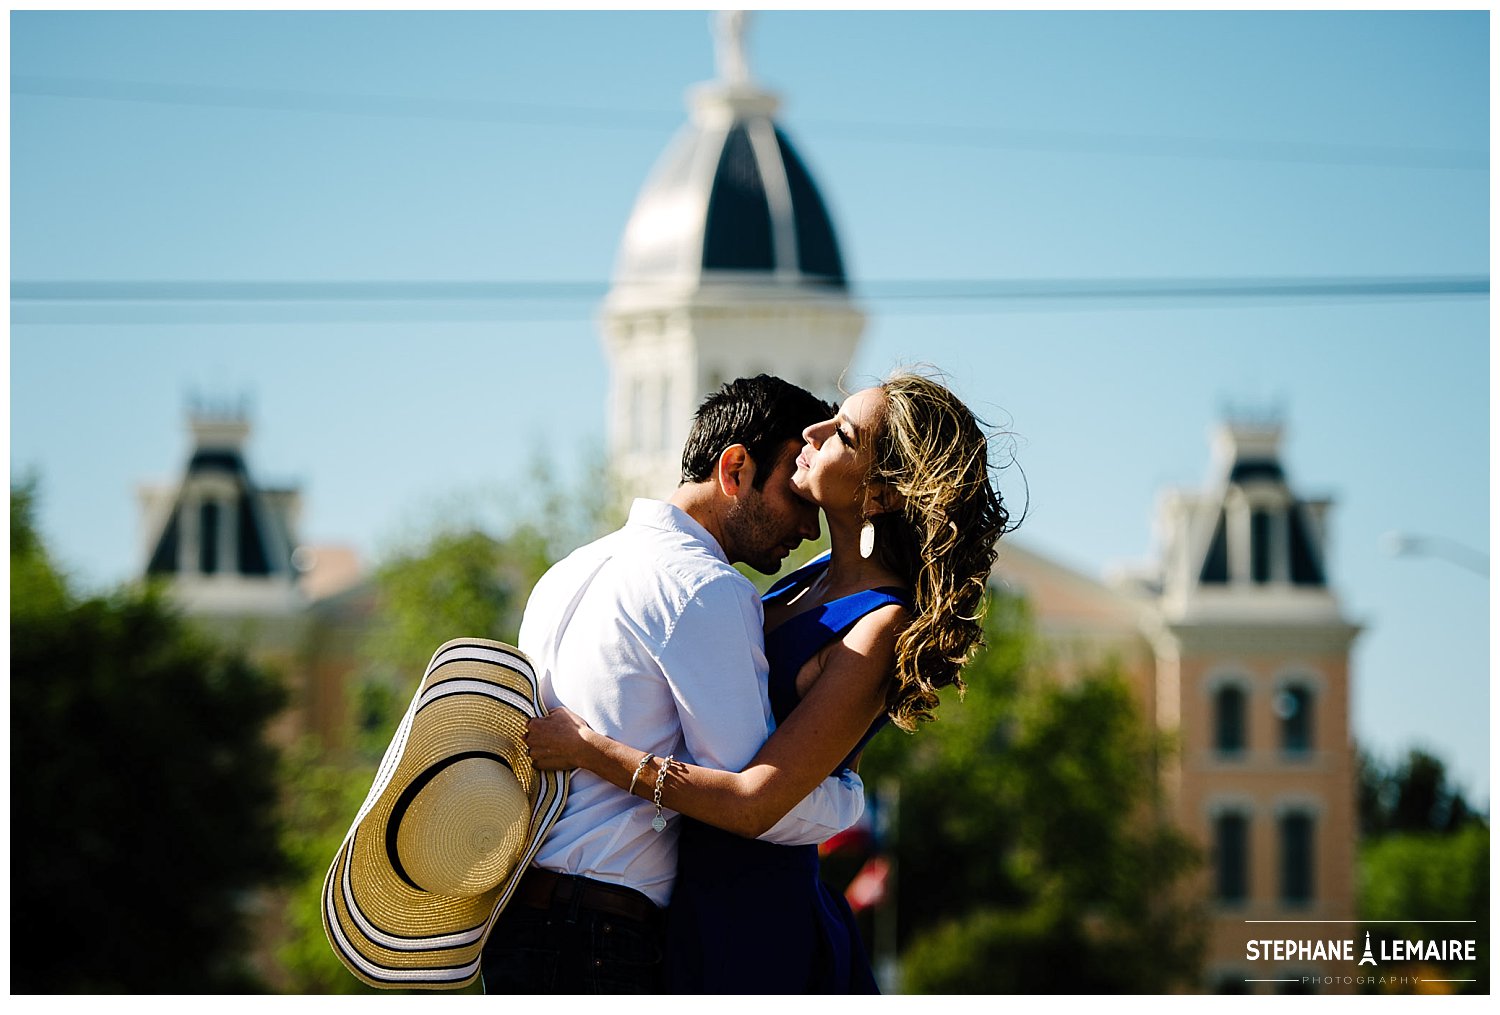 Couple kissing in marfa with city hall behind them.